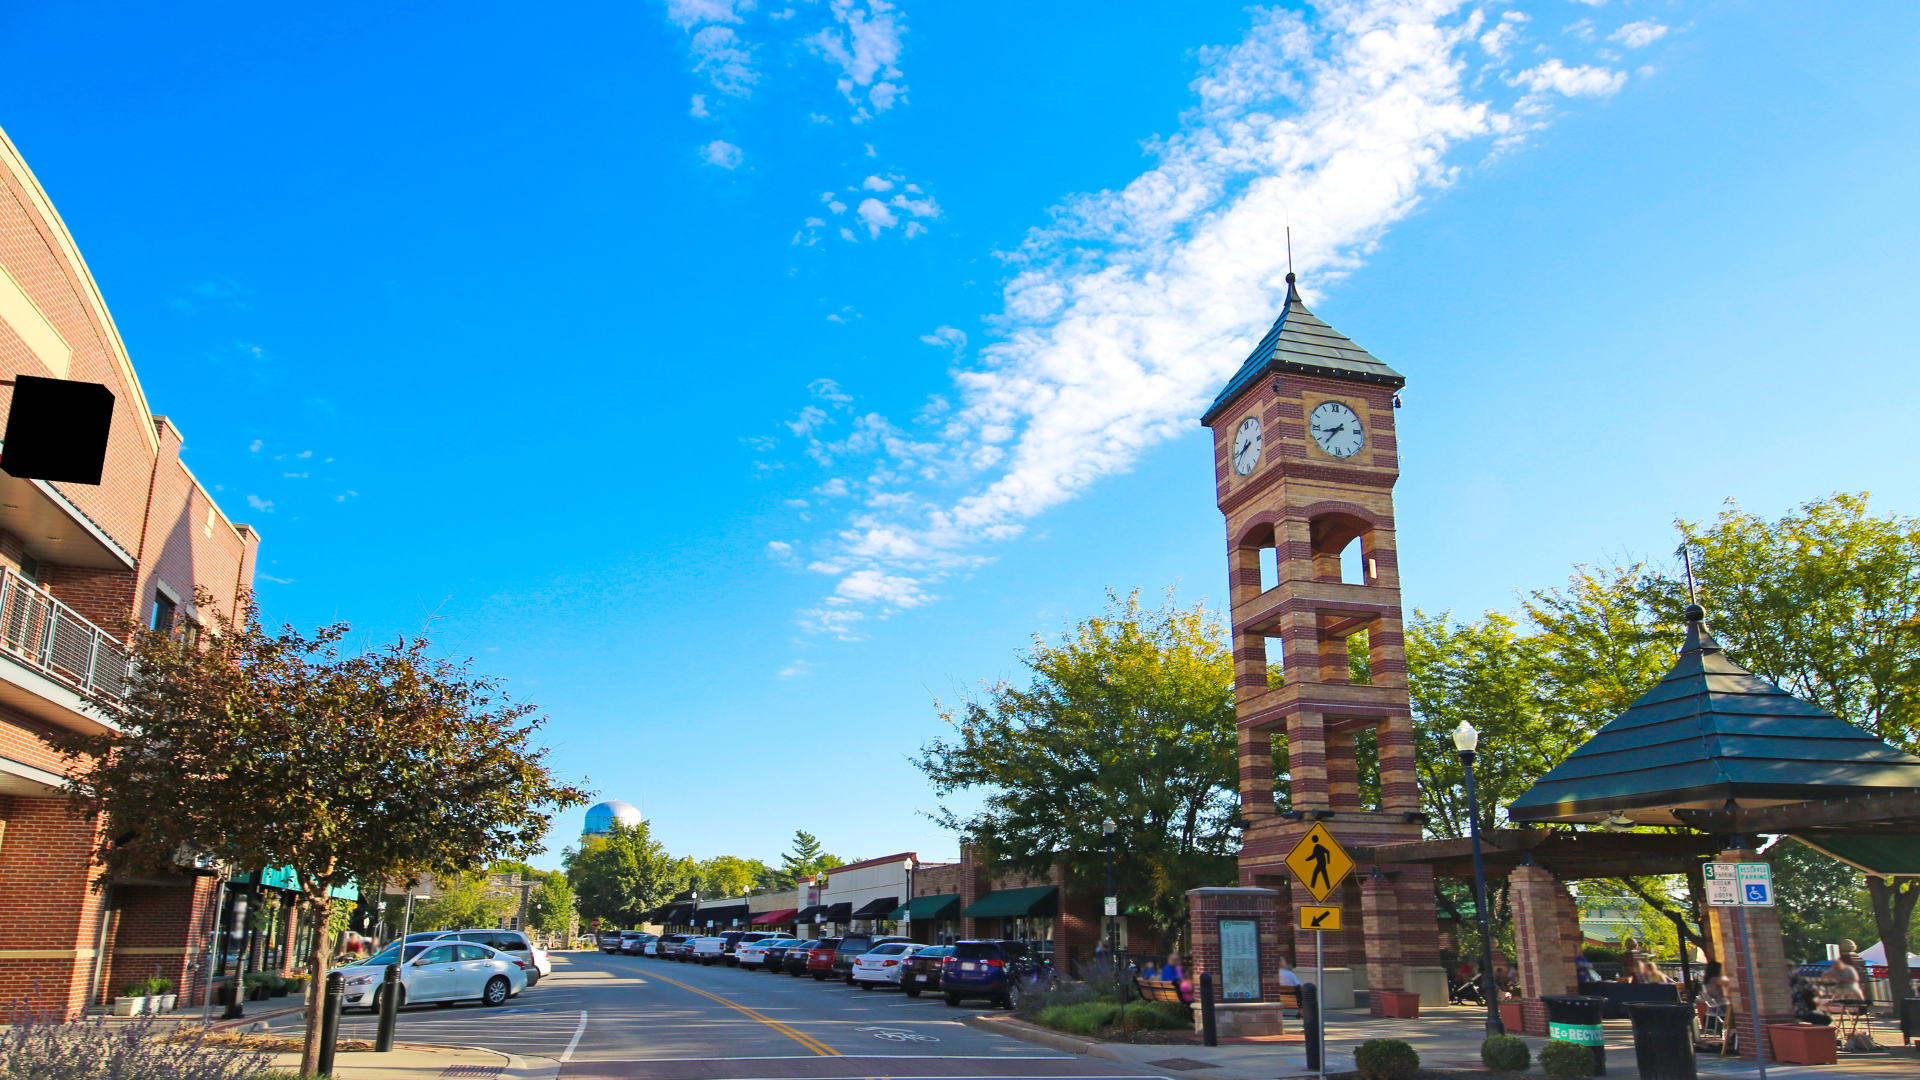 Overland Park named one of the best places to live in US